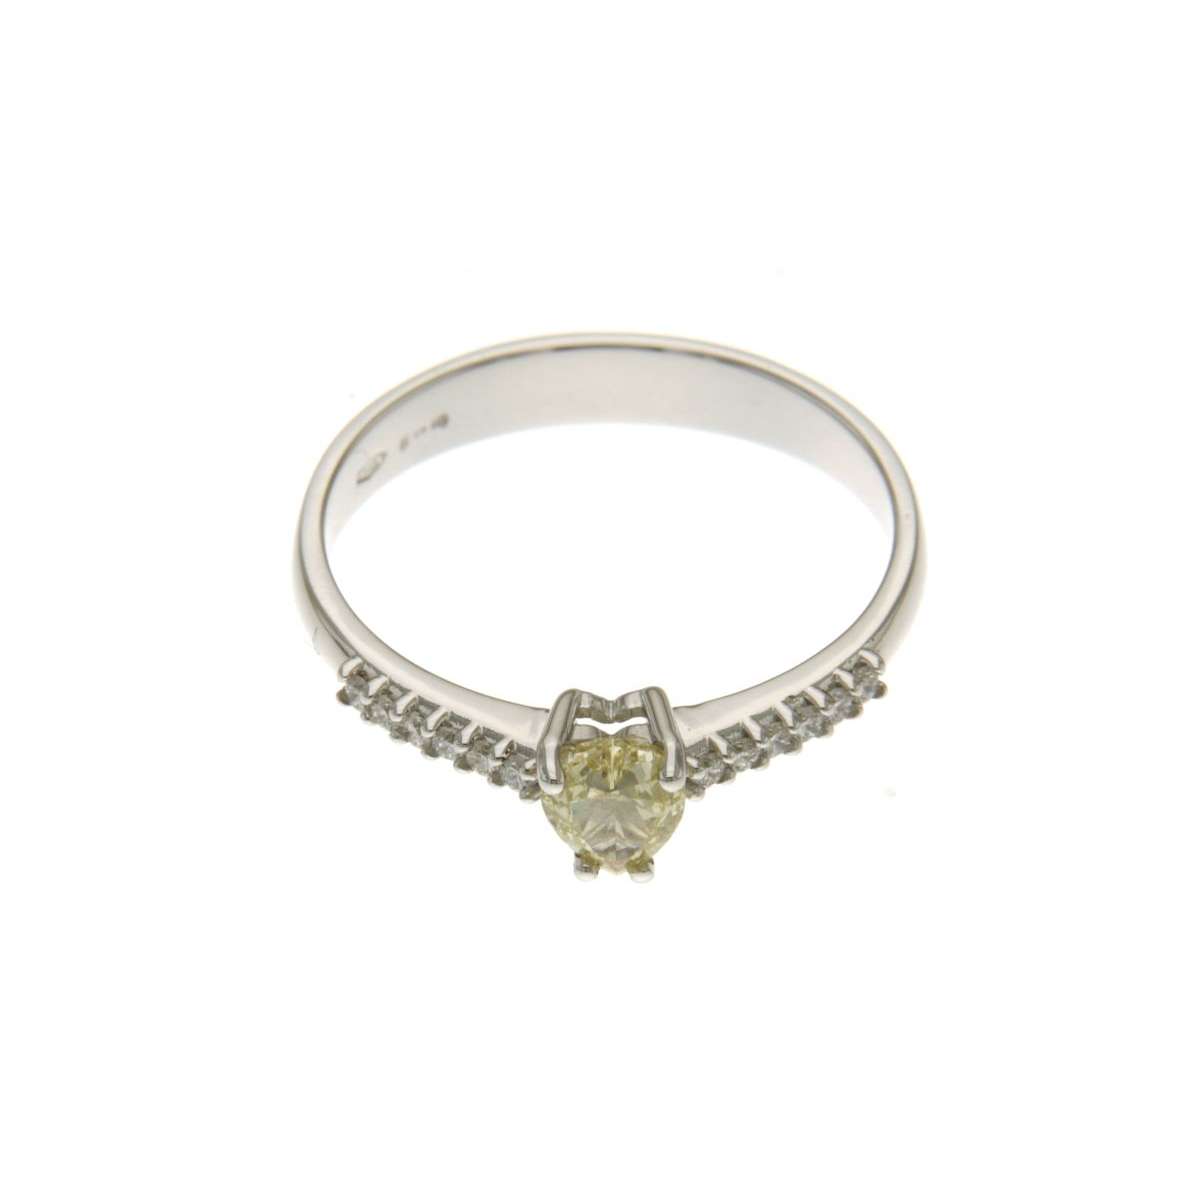 Solitaire ring with white diamonds 0.12 carats G-VS1 and fancy yellow heart cut diamond 0.48 carats FY-VS2